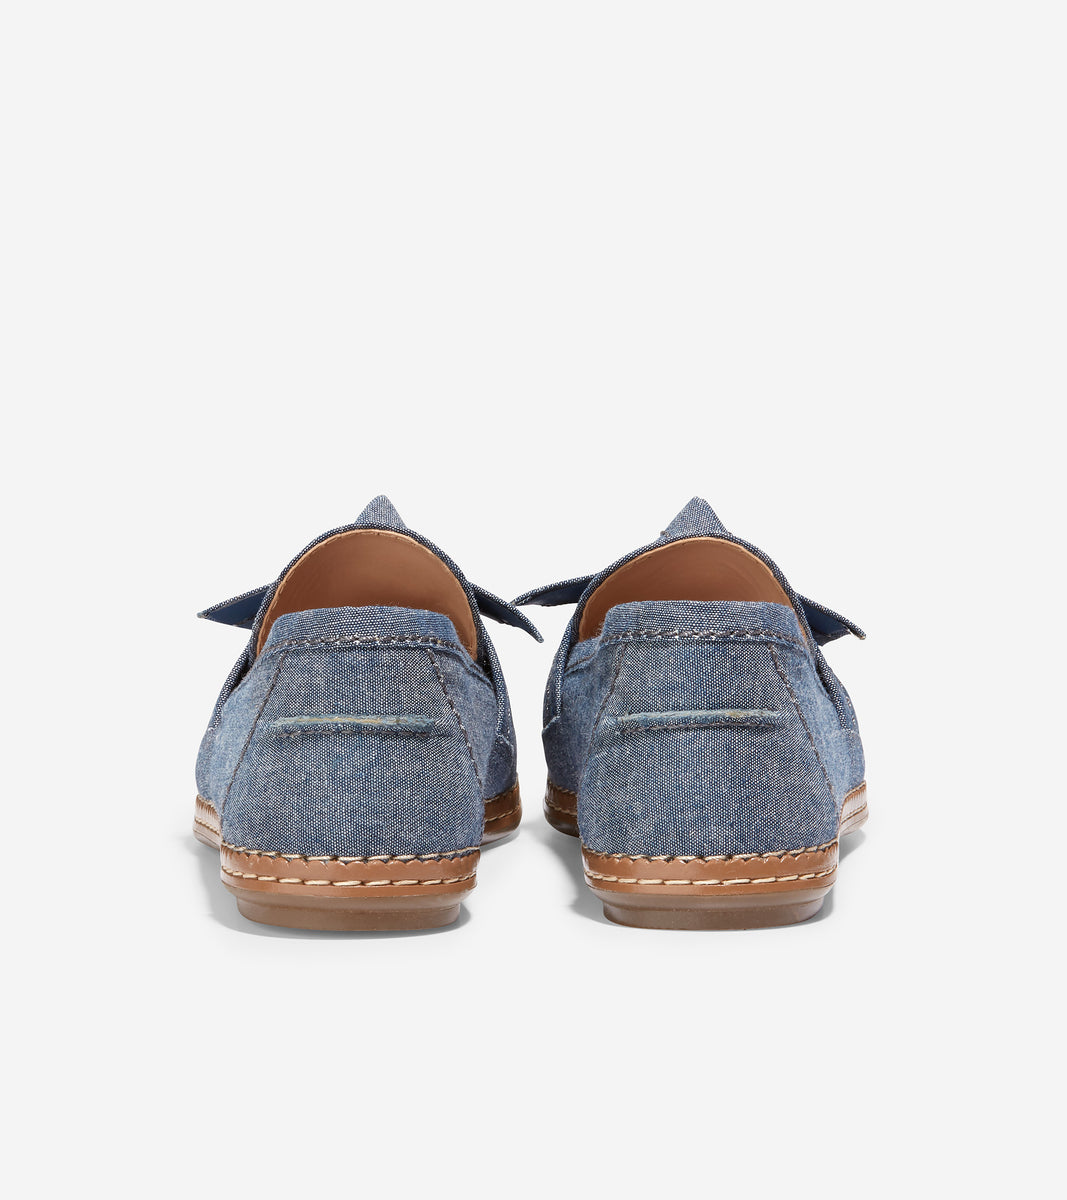 w25761-Cloudfeel All-Day Bow Loafer-Dark Chambray